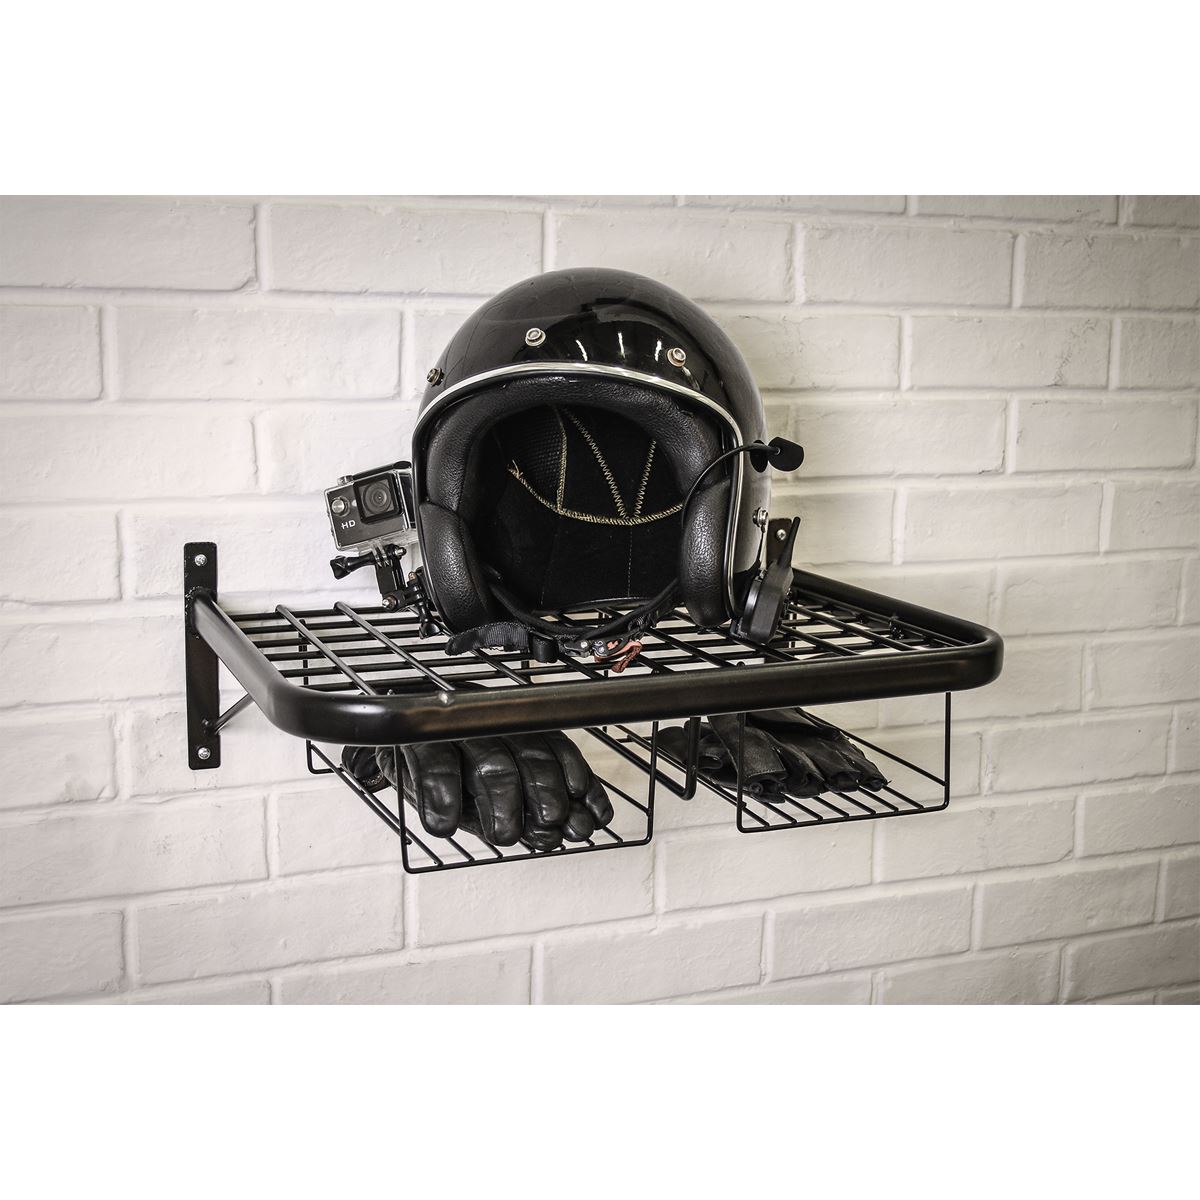 Sealey Motorcycle Helmet, Clothing and Gear Tidy Wall Mounted Shelf Rack 490mm x 350mm